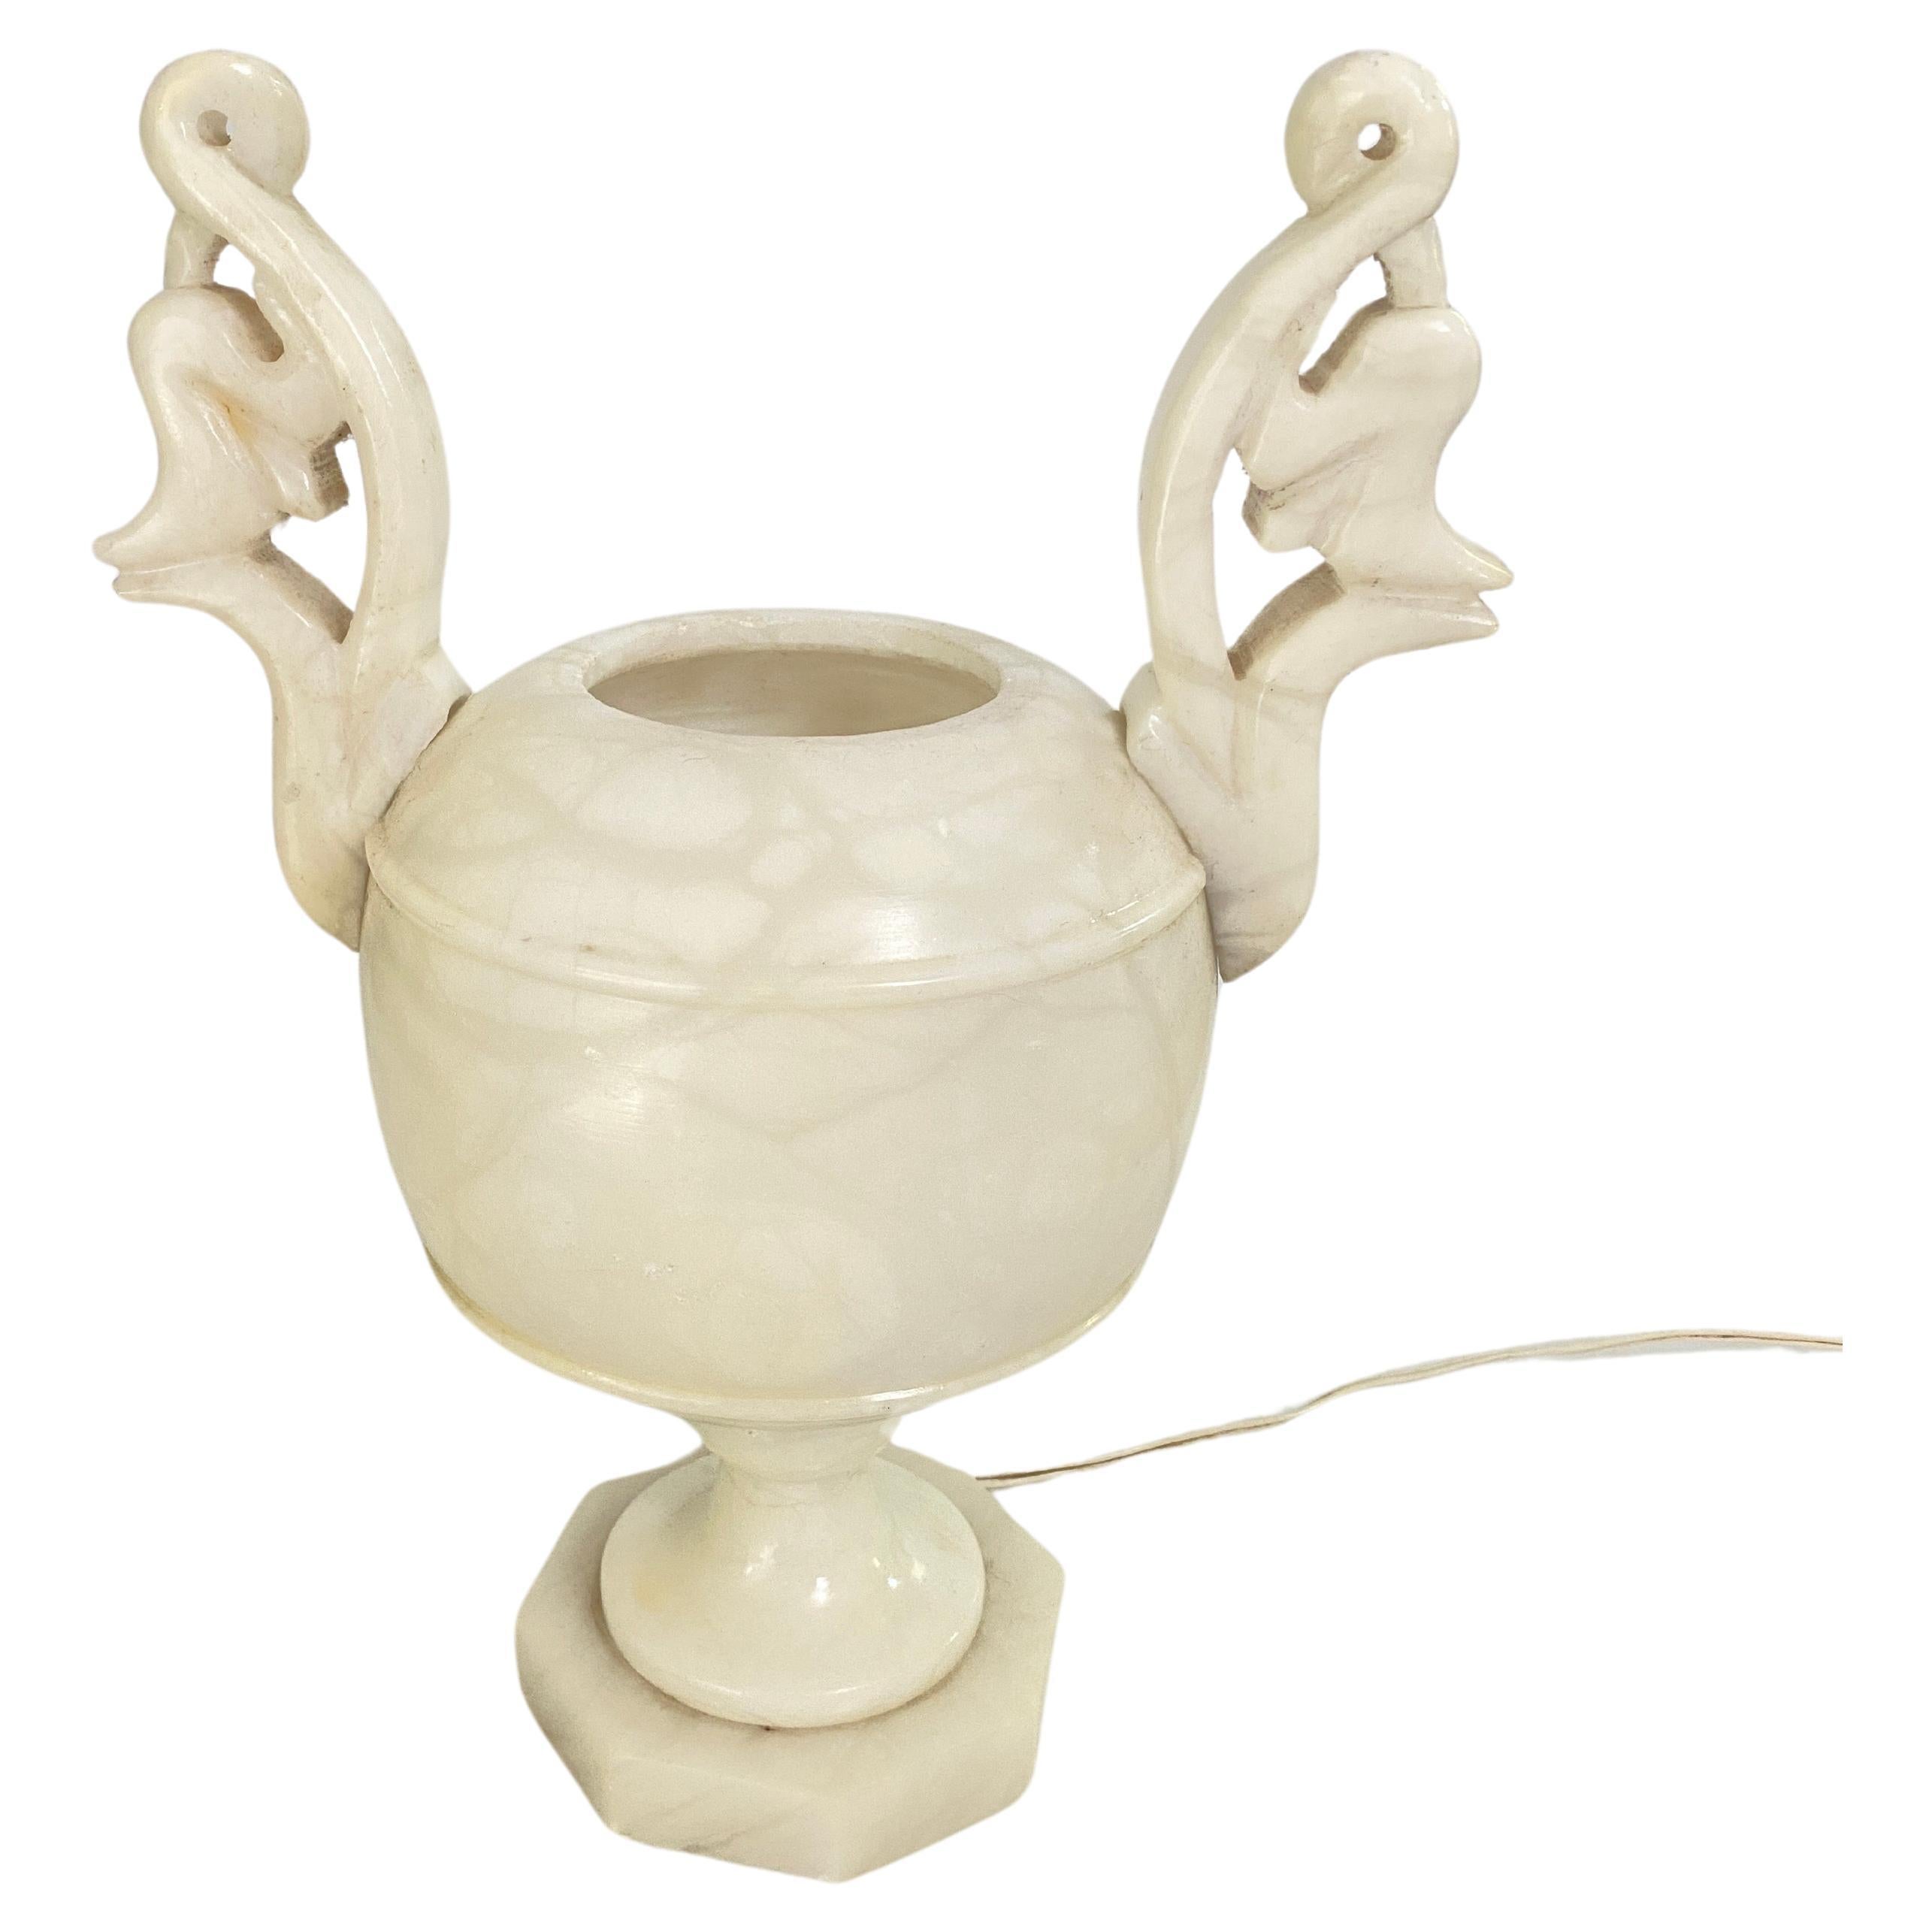 Sculptural alabaster Art Deco period urn table lamp with neoclassical design, France, 1960s.
This elegant carved alabaster neoclassical 'uplighter' urn lamp will be a nice addition placed in a console table or side table.
It provides a charming